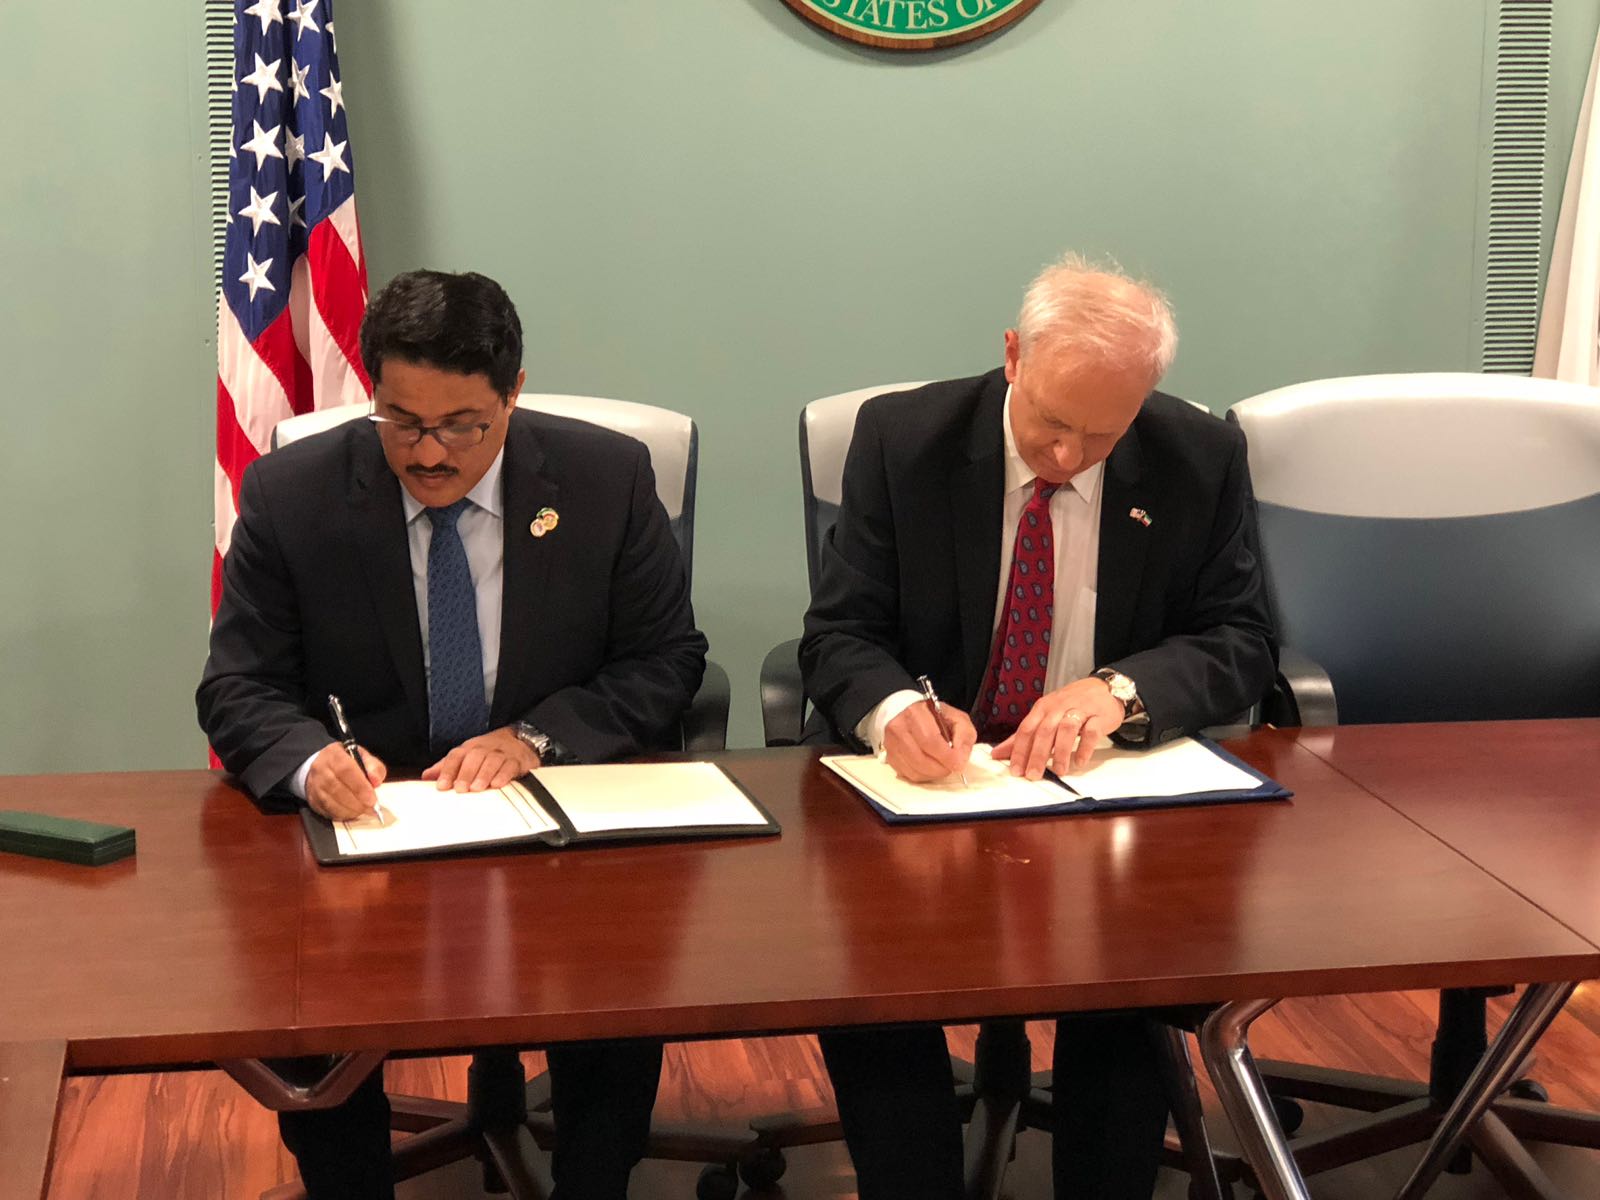 Kuwait's General Administration of Customs and the (NNSA) of the US Department of Energy signed a cooperation agreement